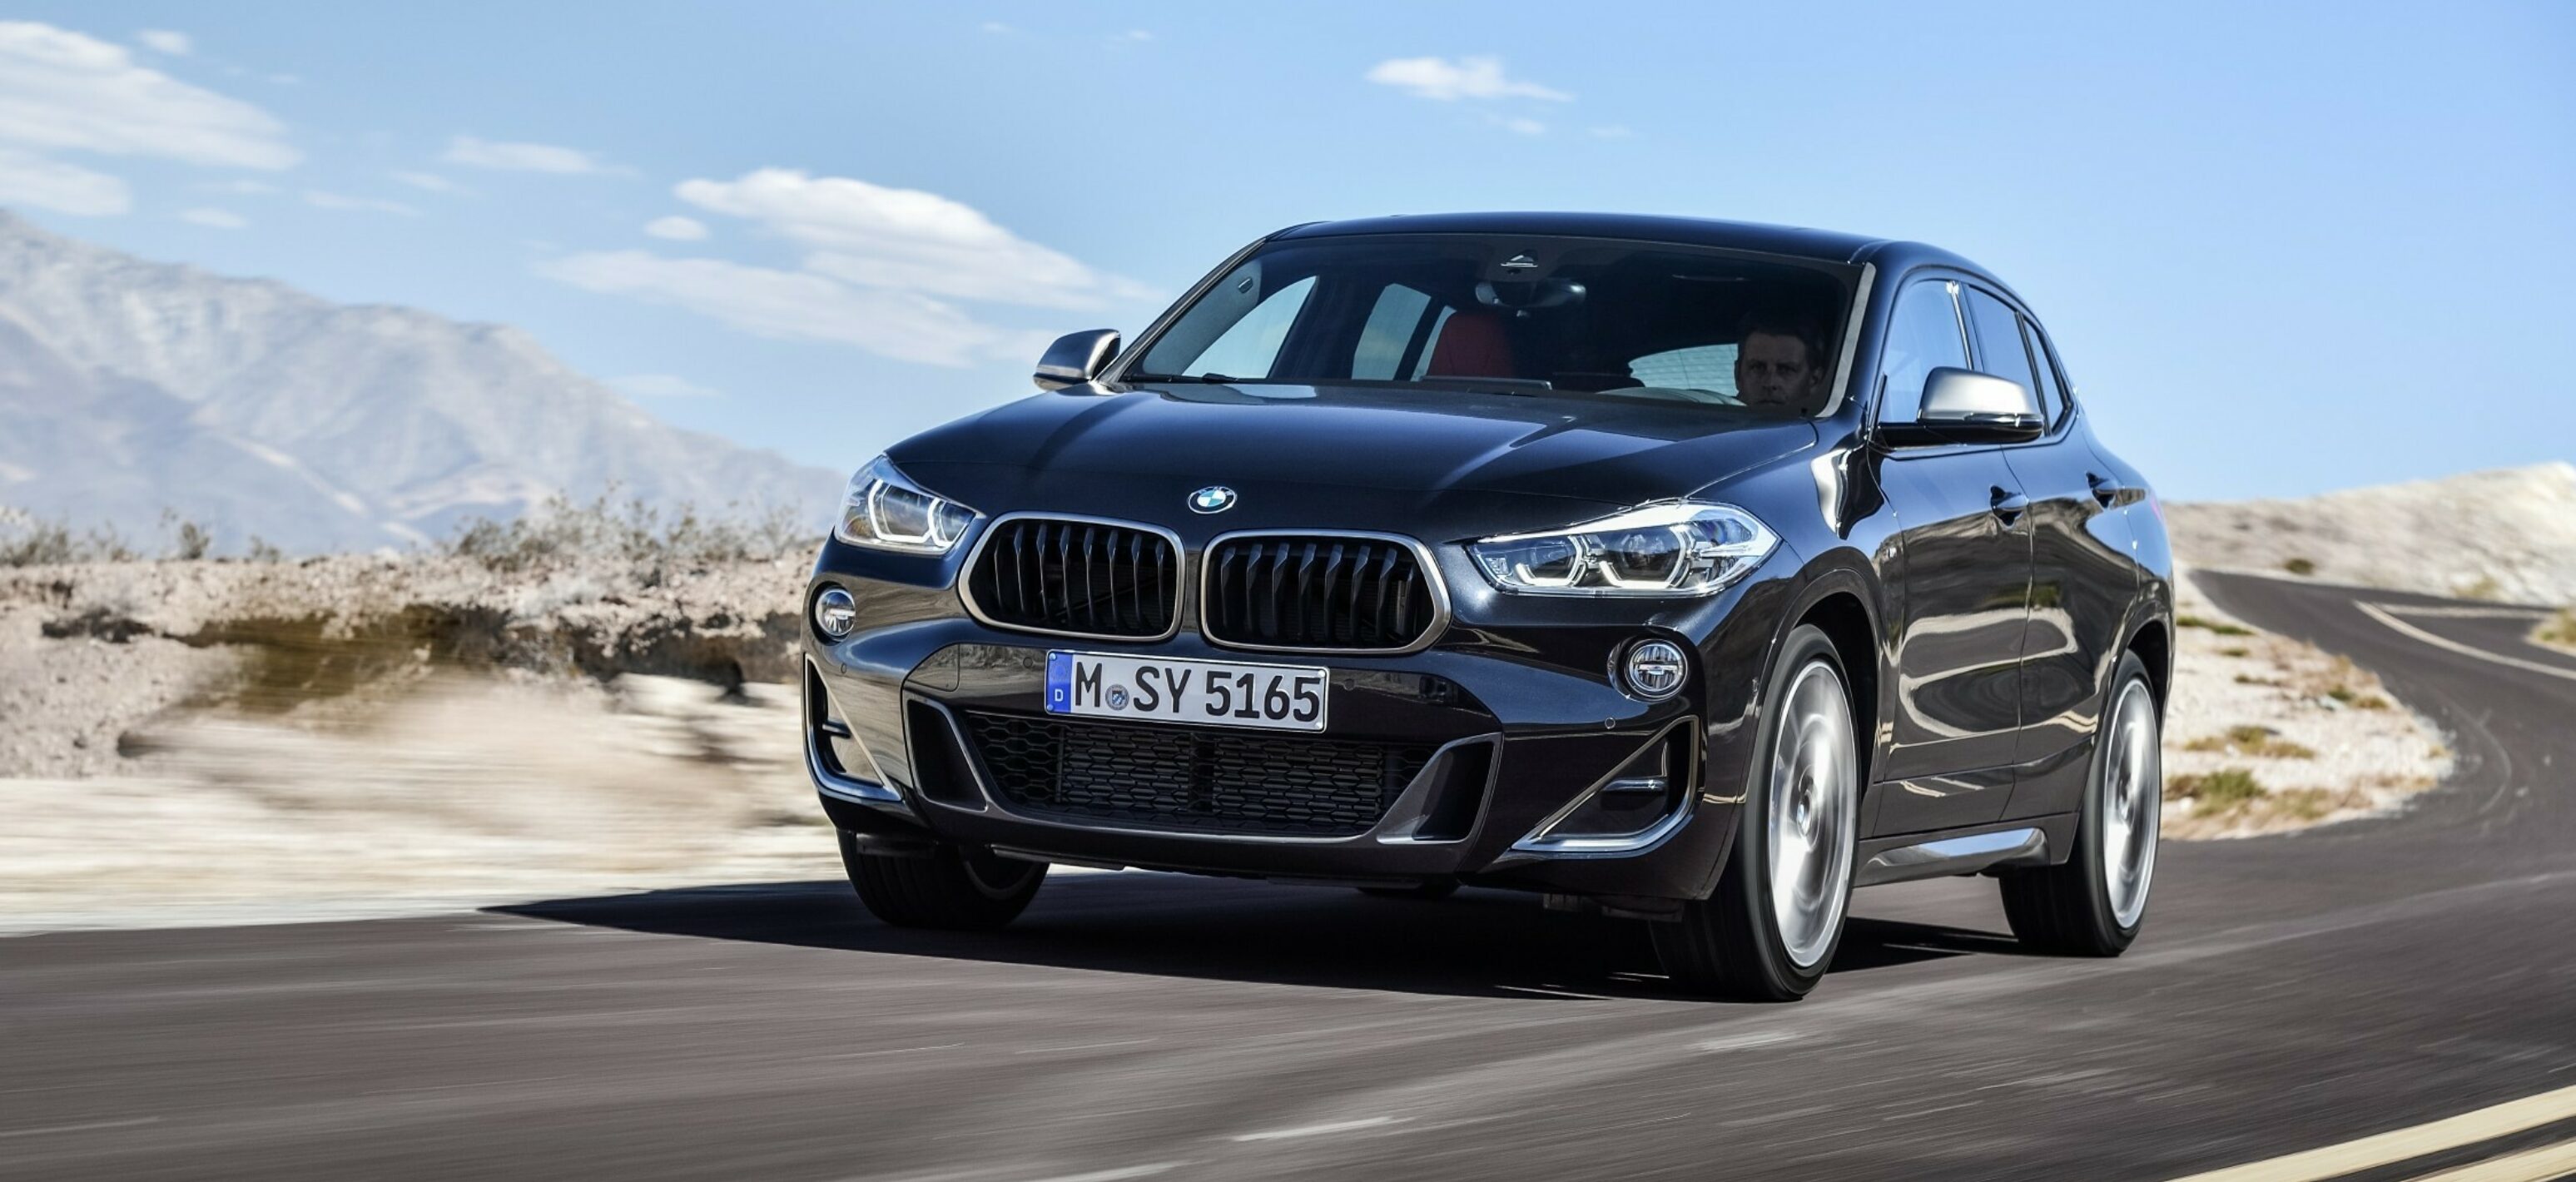 https://autofilter.sk/assets/images/x1/gallery/P90320375_lowRes_the-new-bmw-x2-m35i.jpg - obrazok